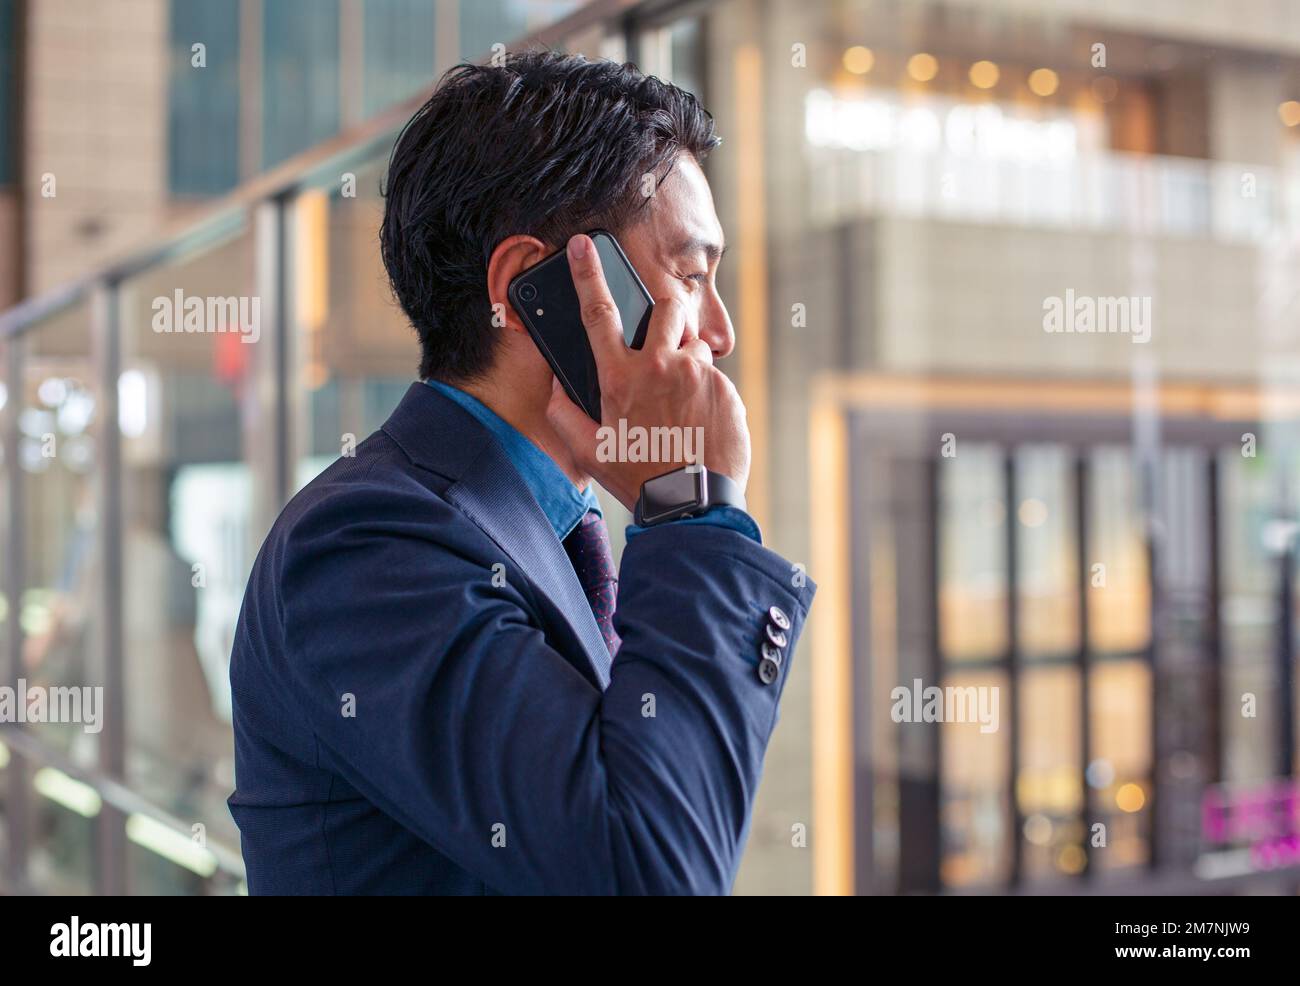 A young businessman in a blue suit on the move in a city downtown area, speaking on his mobile phone. Stock Photo